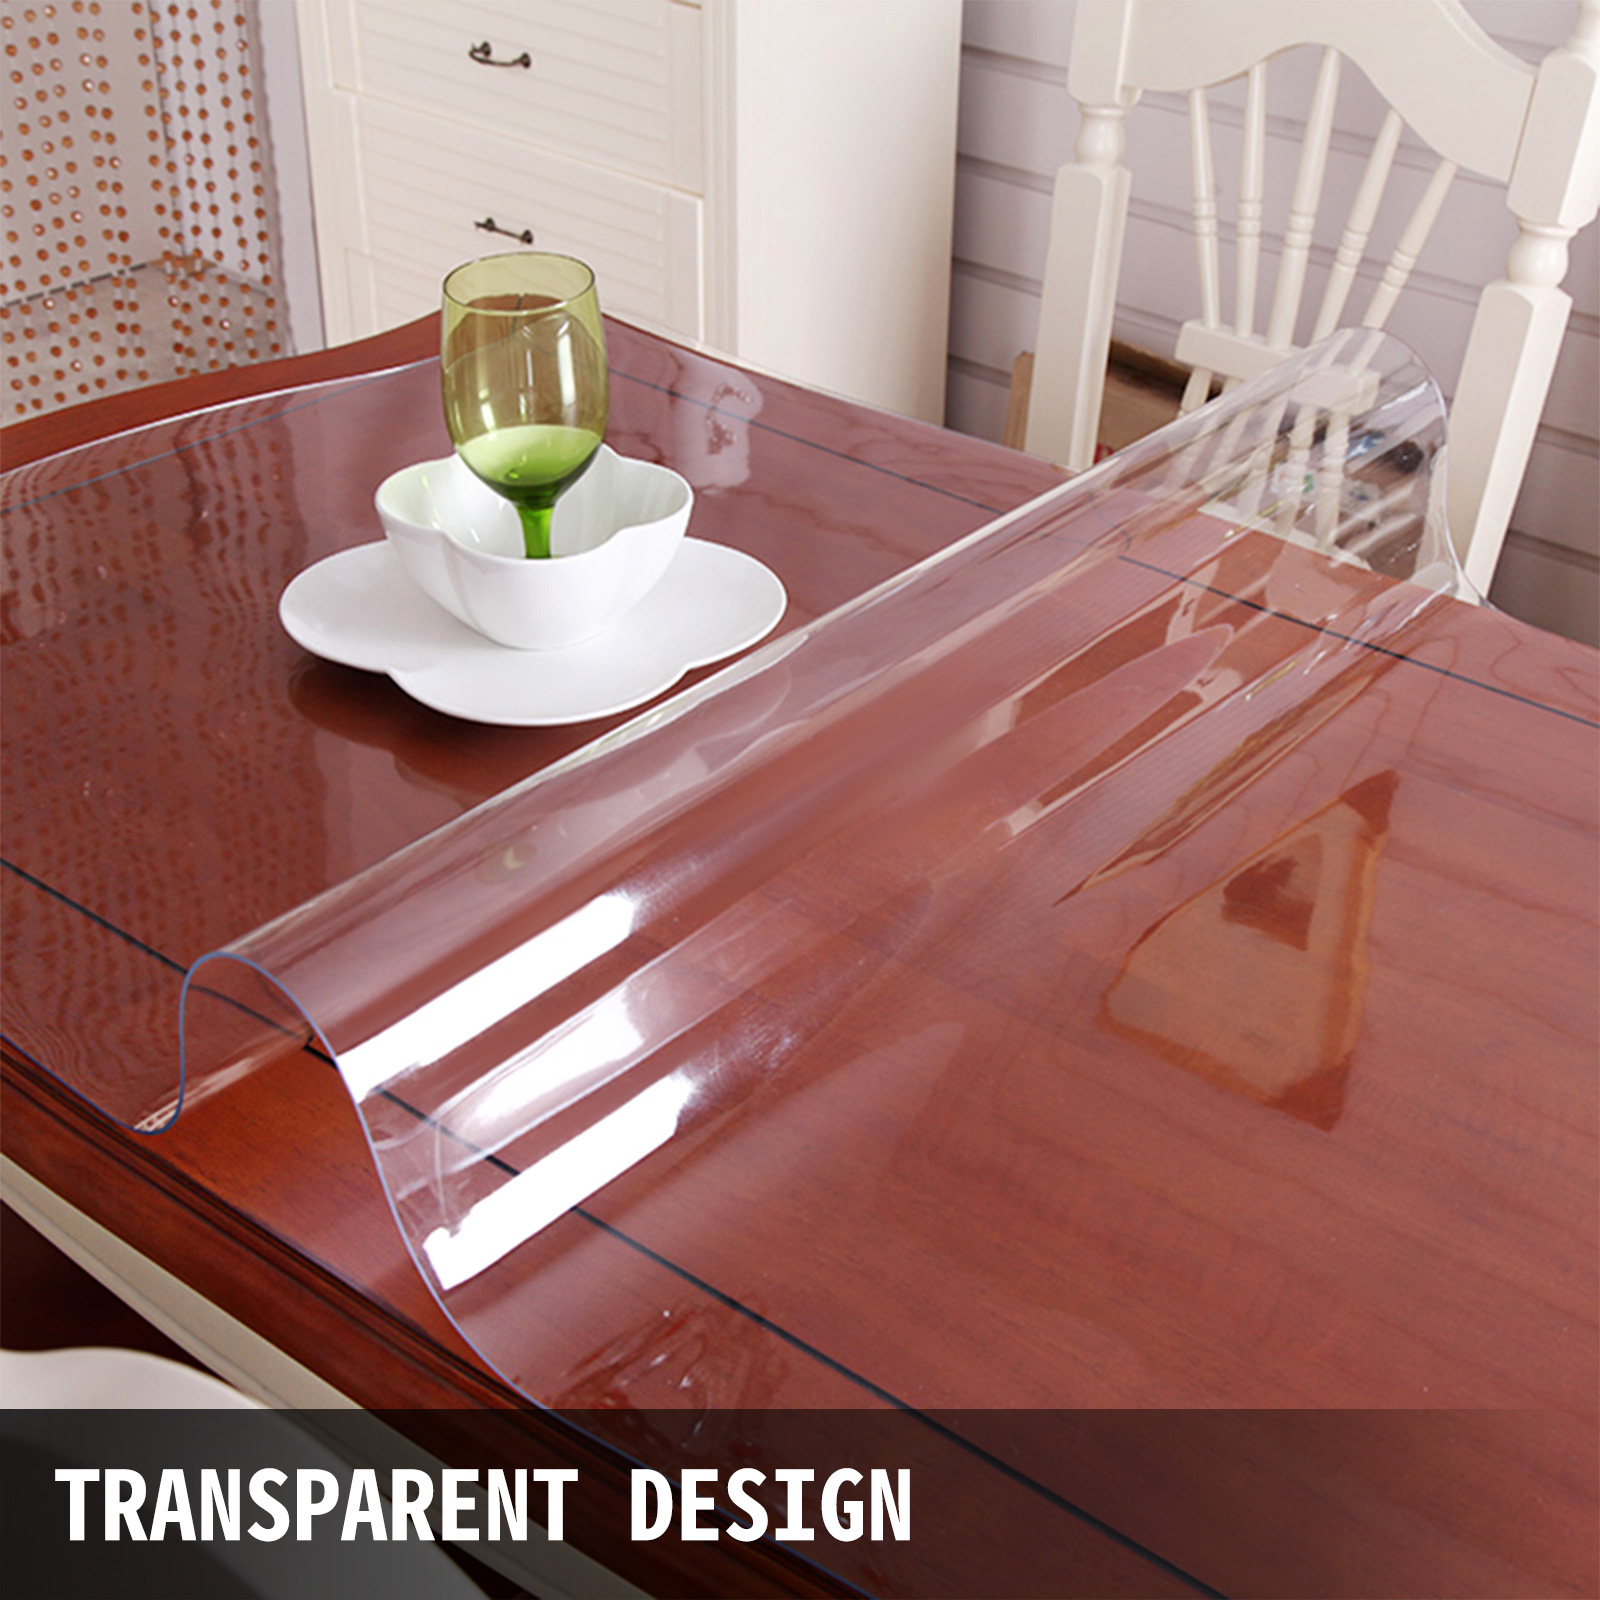 Astonishing Photos Of Table Pads For Dining Room Table Ideas | DP BBM Lucu